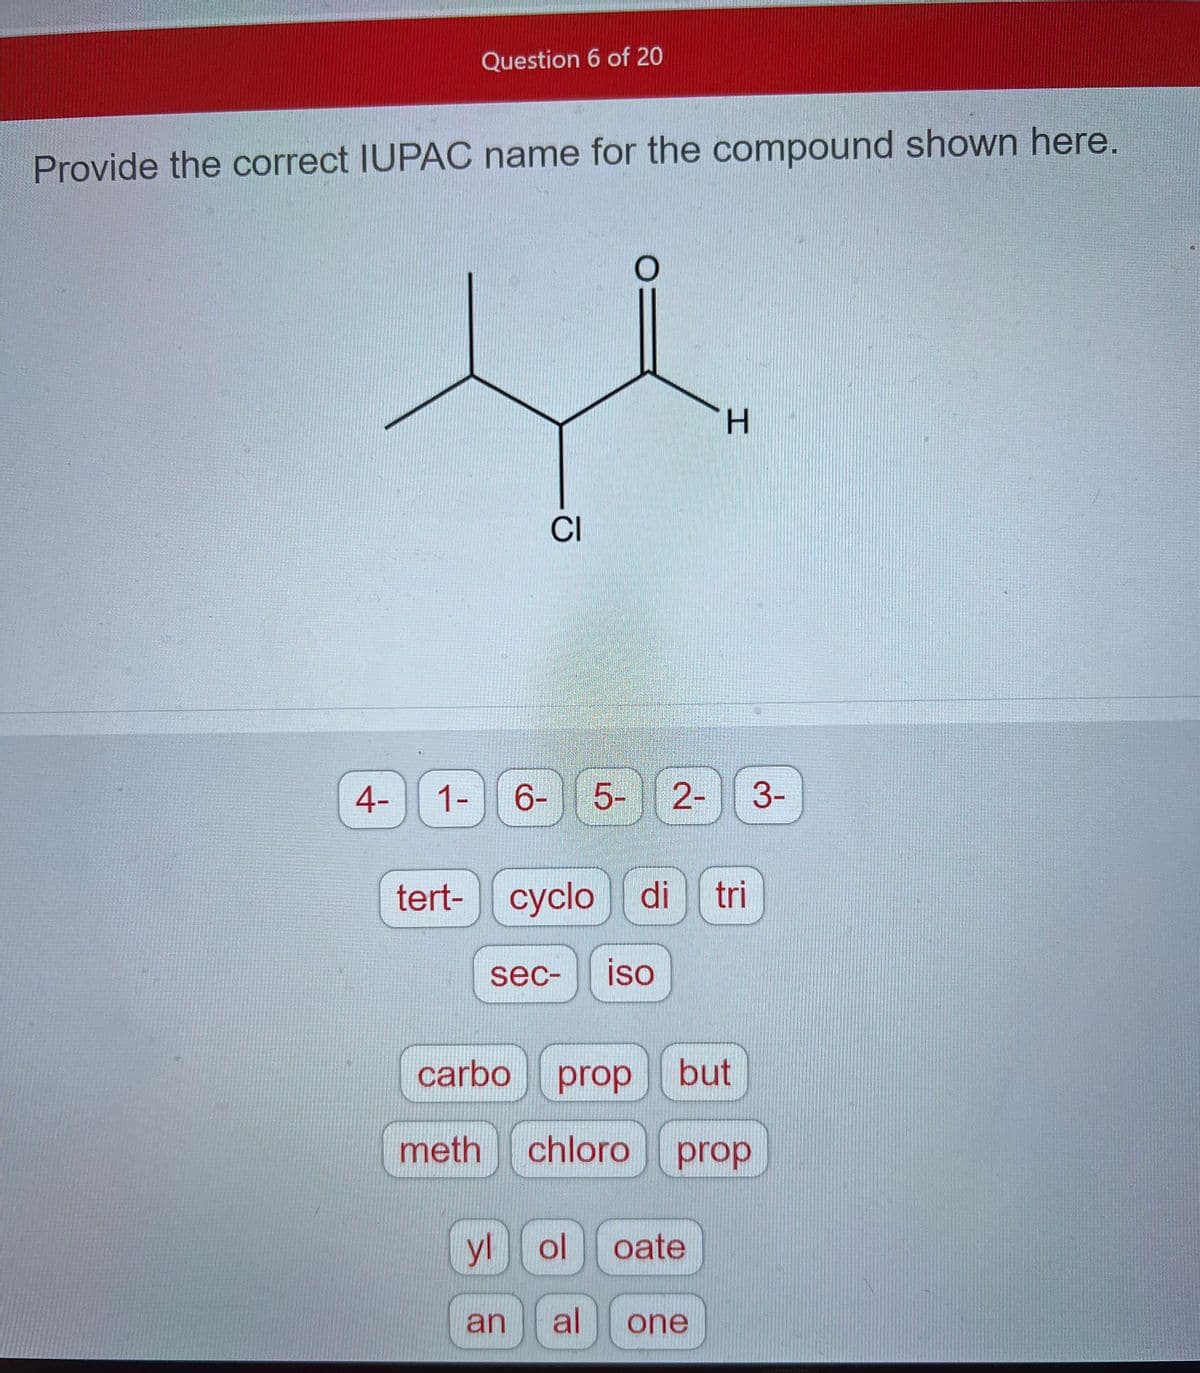 Provide the correct IUPAC name for the compound shown here.
4-
L
Question 6 of 20
1-
6-
CI
5-
tert- cyclo di tri
sec- iso
H
but
yl ol oate
an al
carbo prop
meth chloro prop
one
3-